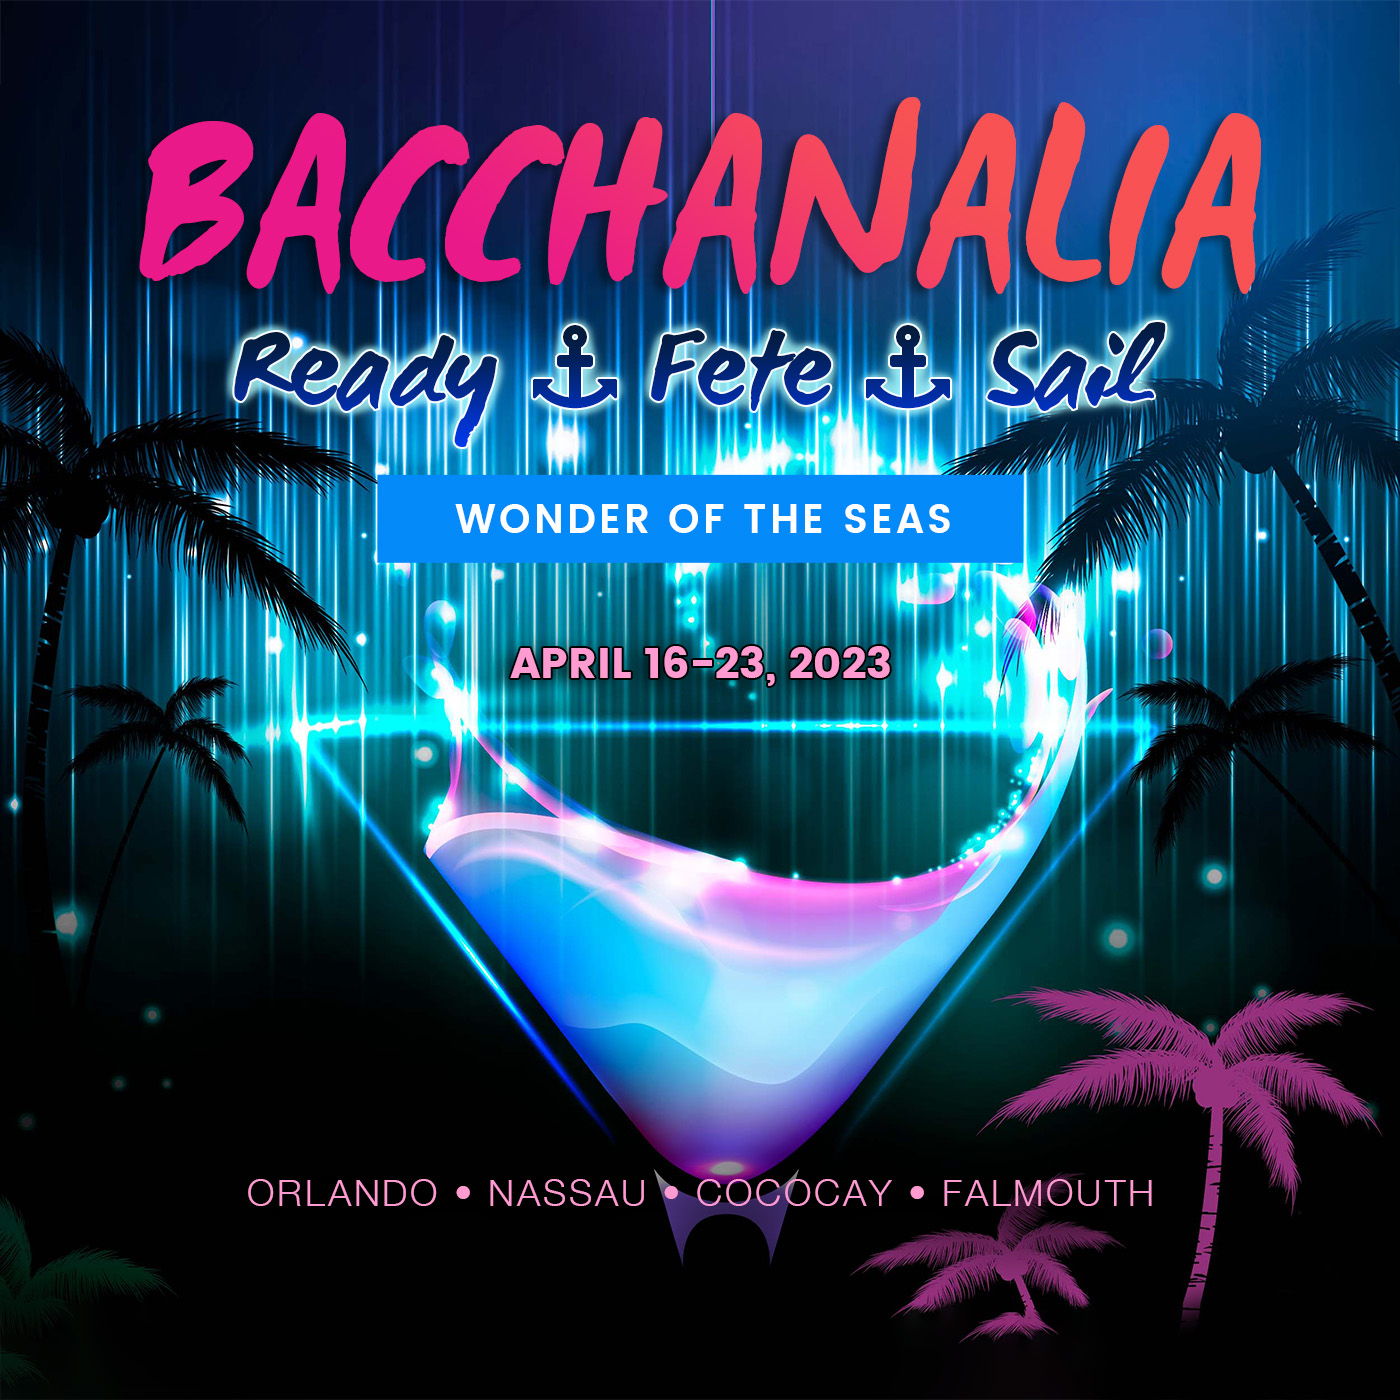 A poster for the bacchanalia event.